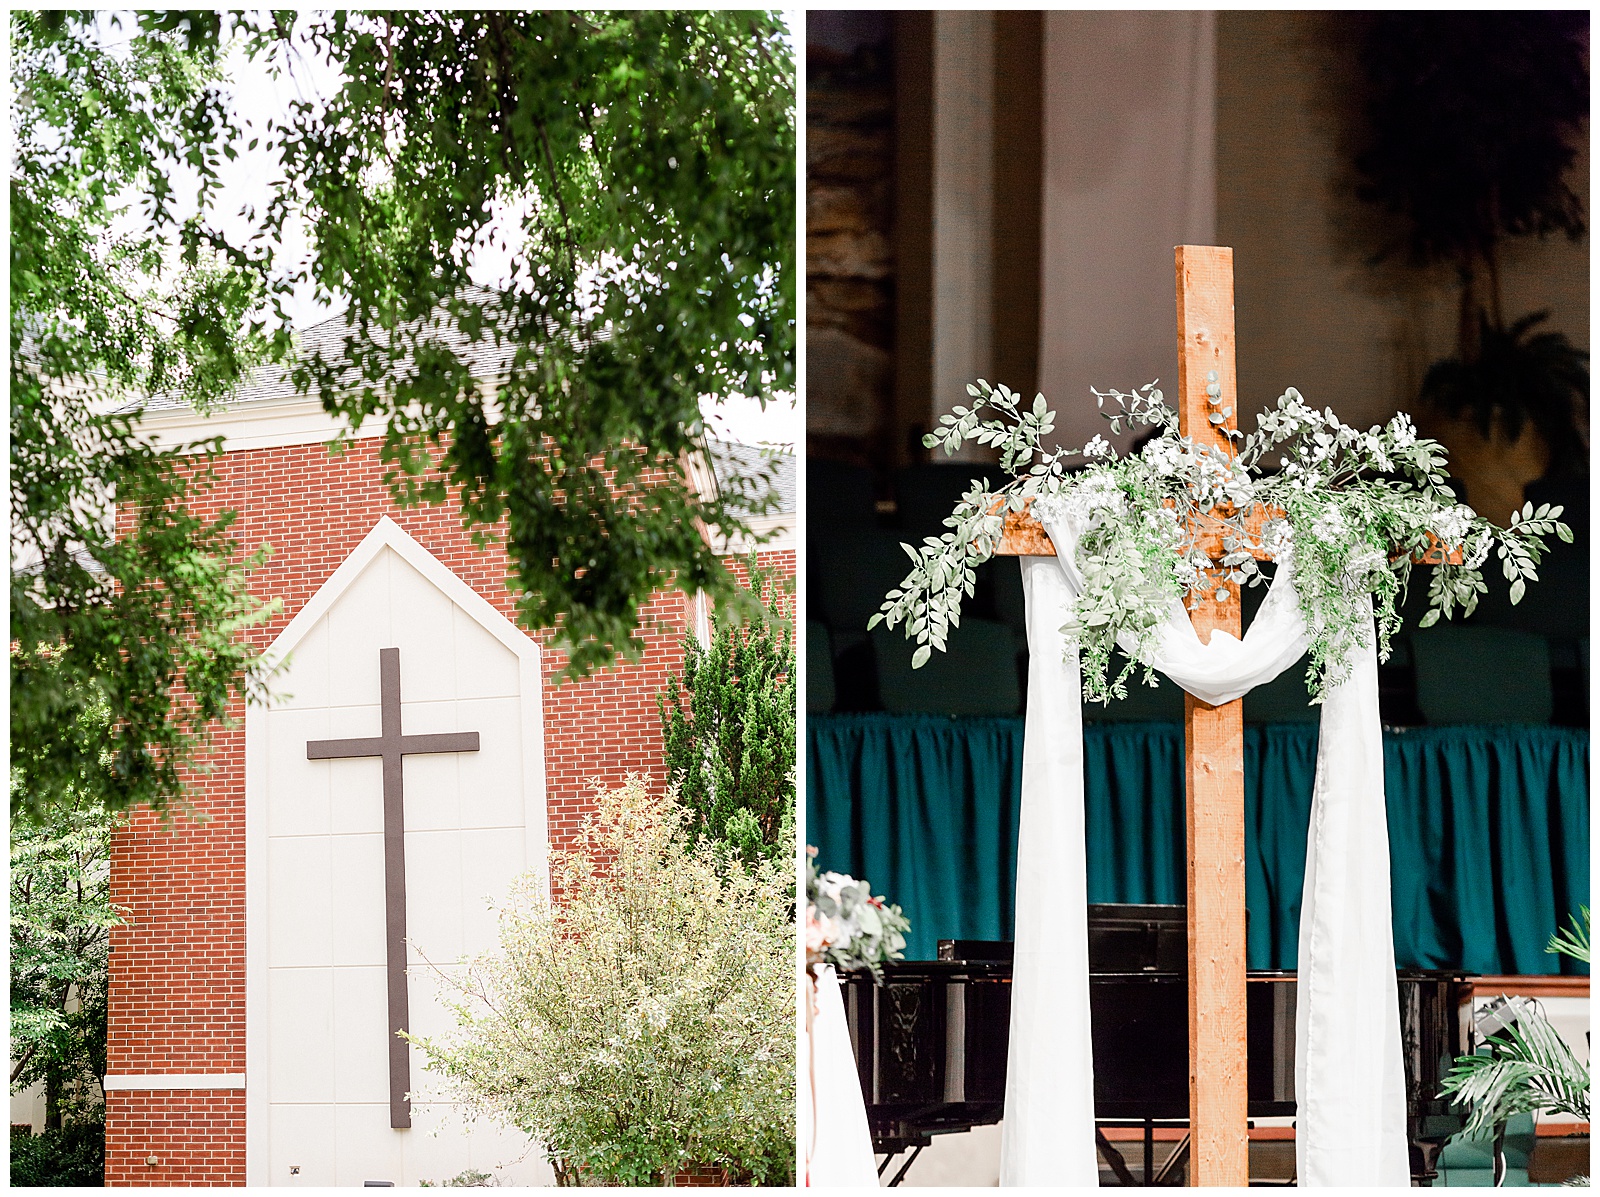 Floral Wooden Cross Altar at Brick Church Wedding Venue from Elegant Modern Summer Wedding in Charlotte, NC | check out the full wedding at KevynDixonPhoto.com